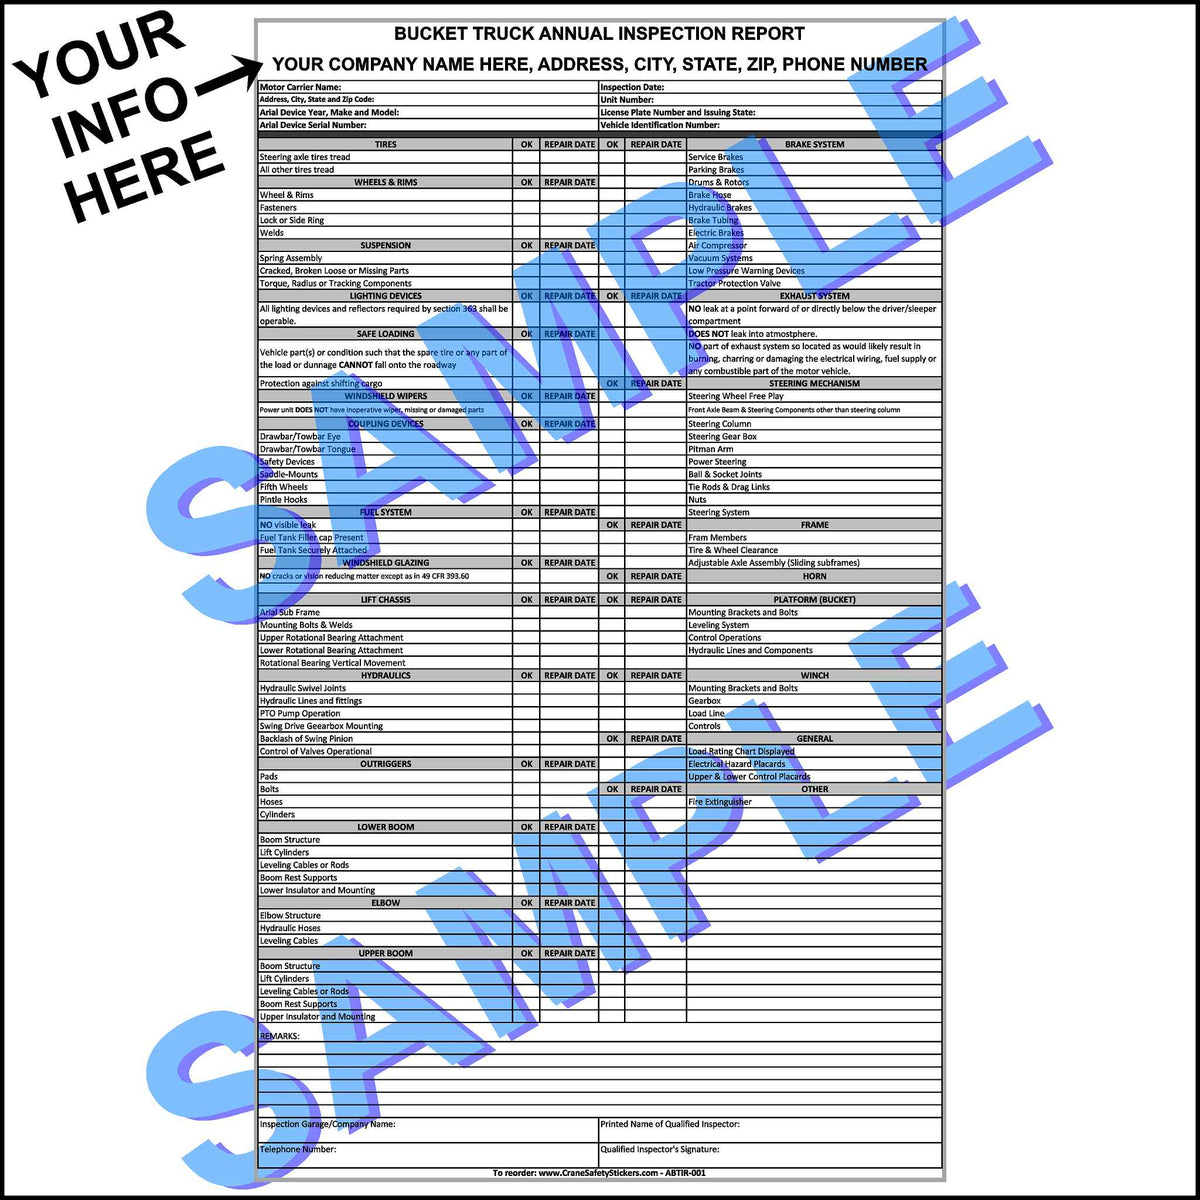 Bucket Truck Annual Inspection Checklist and Forms. This 3 ply carbonless form has all the necessary things to check to pass your annual inspection.  